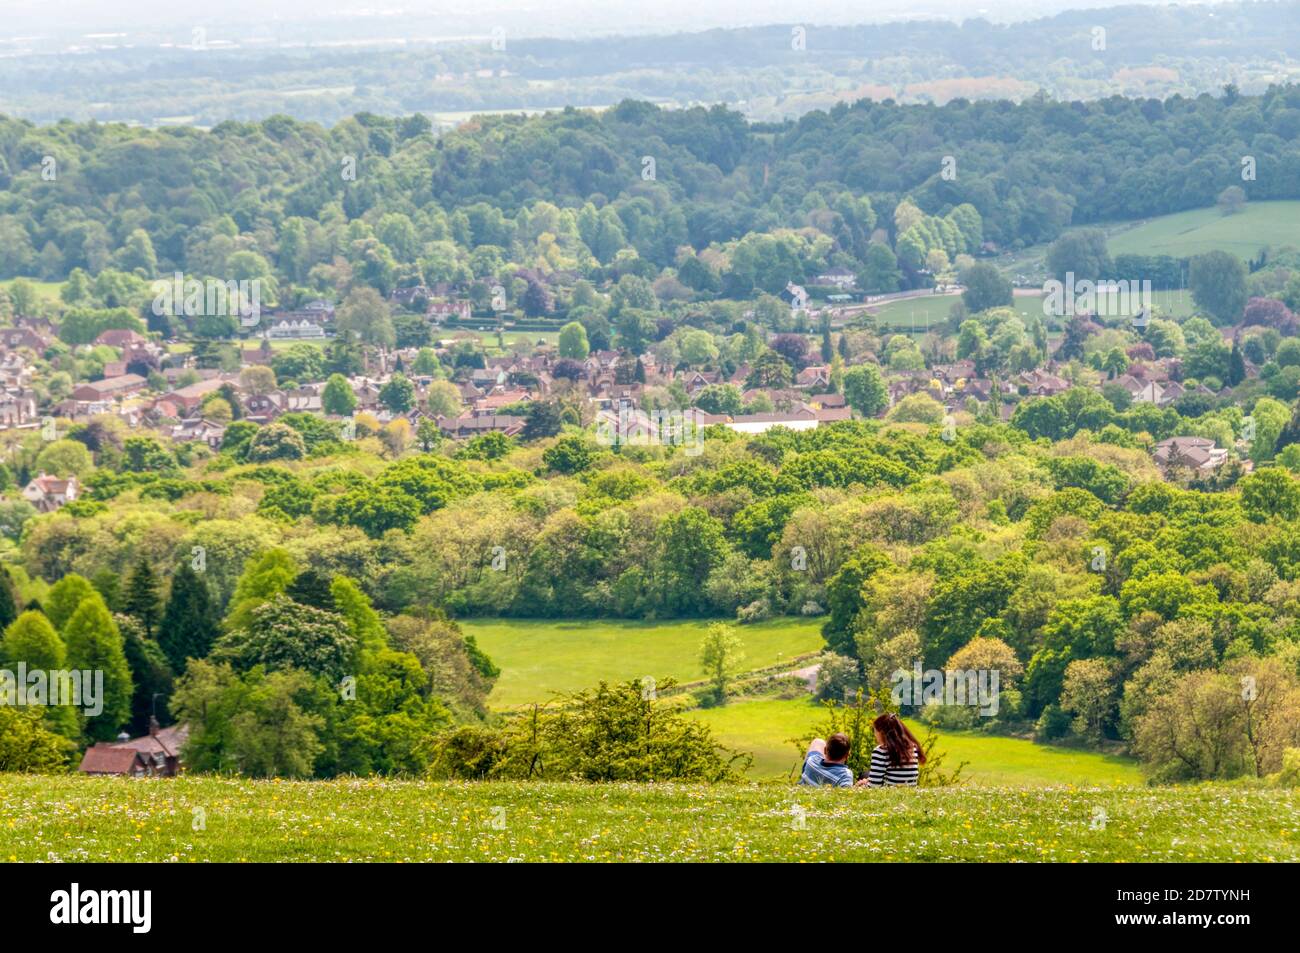 People sitting on grass looking at view of the suburban town of Reigate from Reigate Hill in London's green belt. Stock Photo